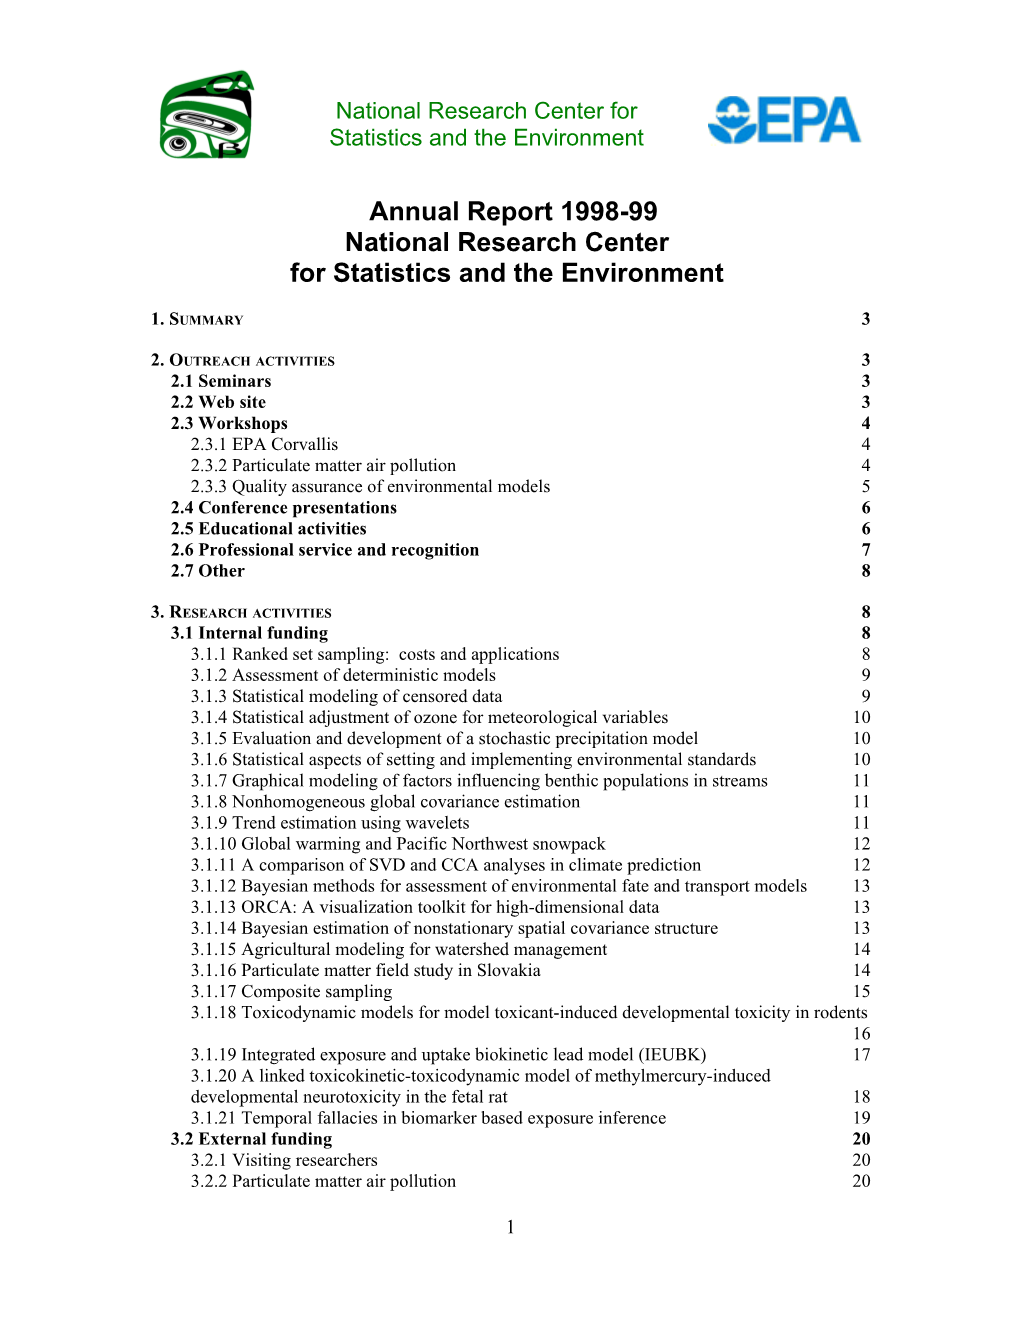 Annual Report for The